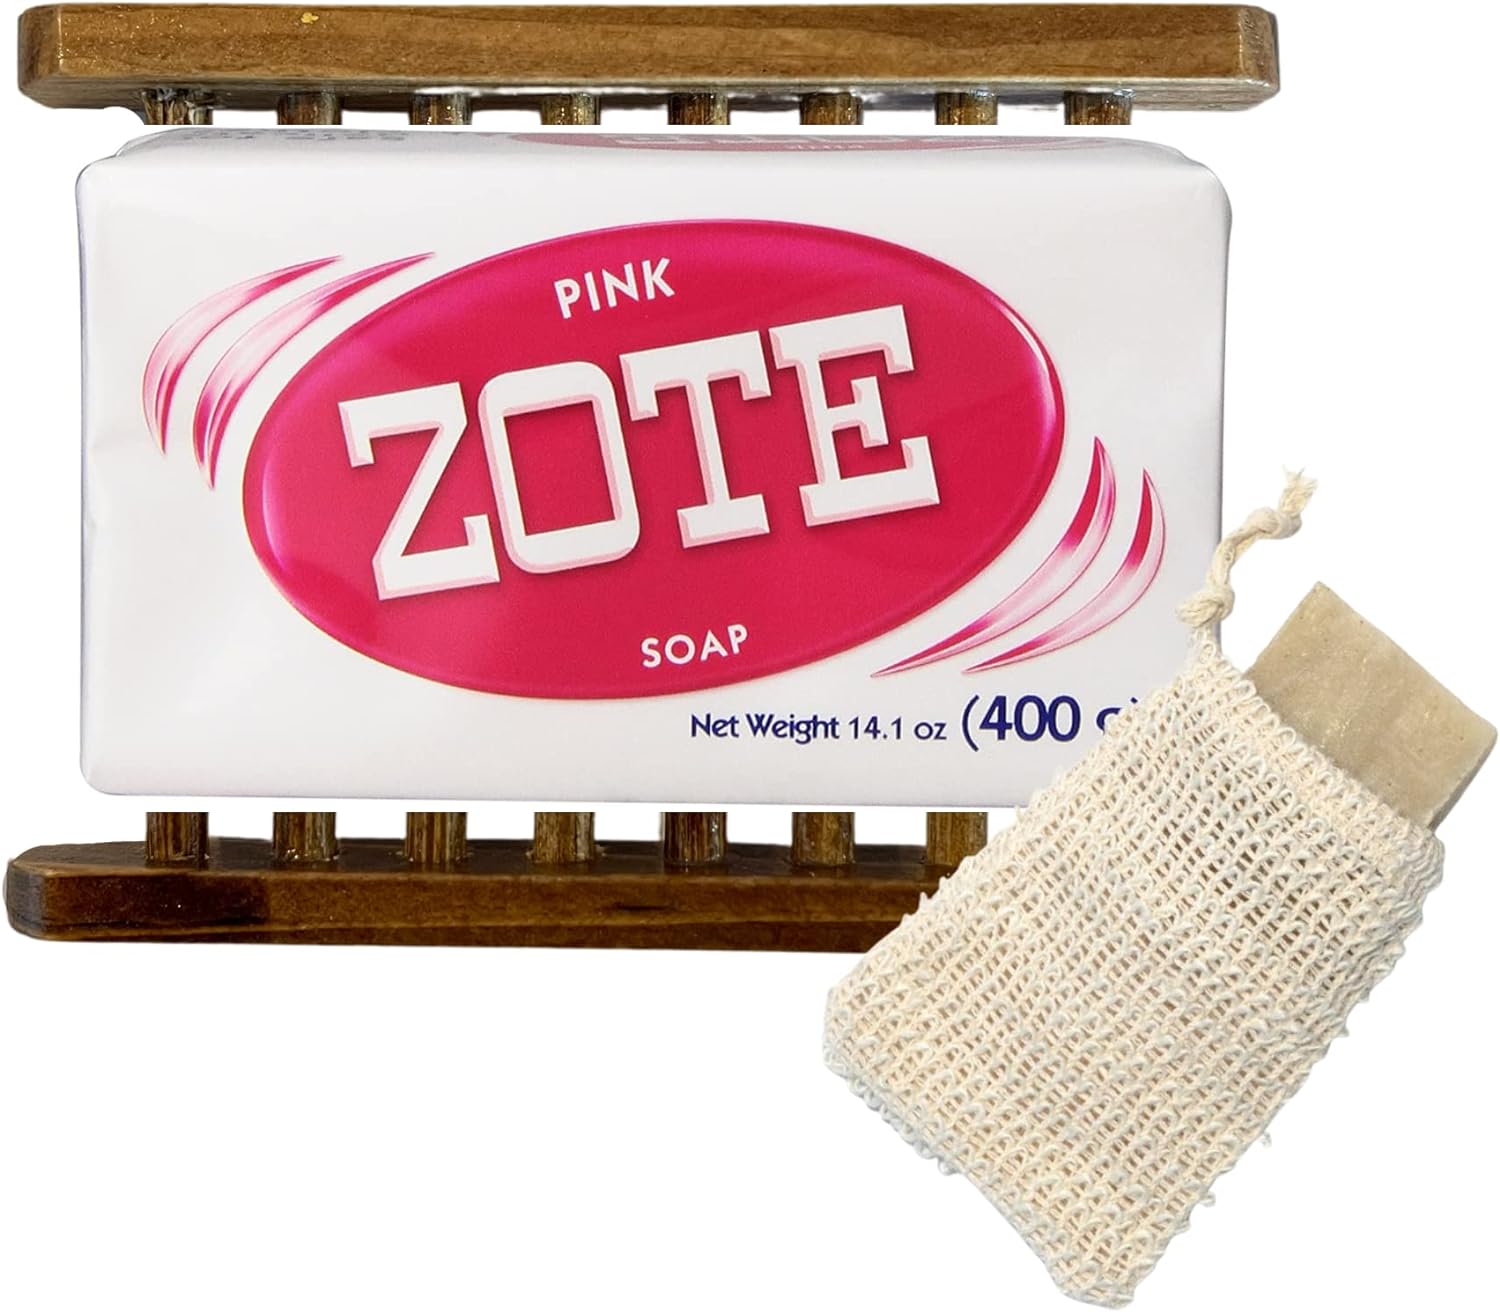 ZOTE Pink Laundry Detergent Bar Soap and Stain Remover Bundle by Foxtail Collective - Includes 1 (14-ounce) Zote Pink Laundry Bar, Soap Bamboo Soap Holder, Sisal Soap Bag, DIY Laundry Detergent Recipe